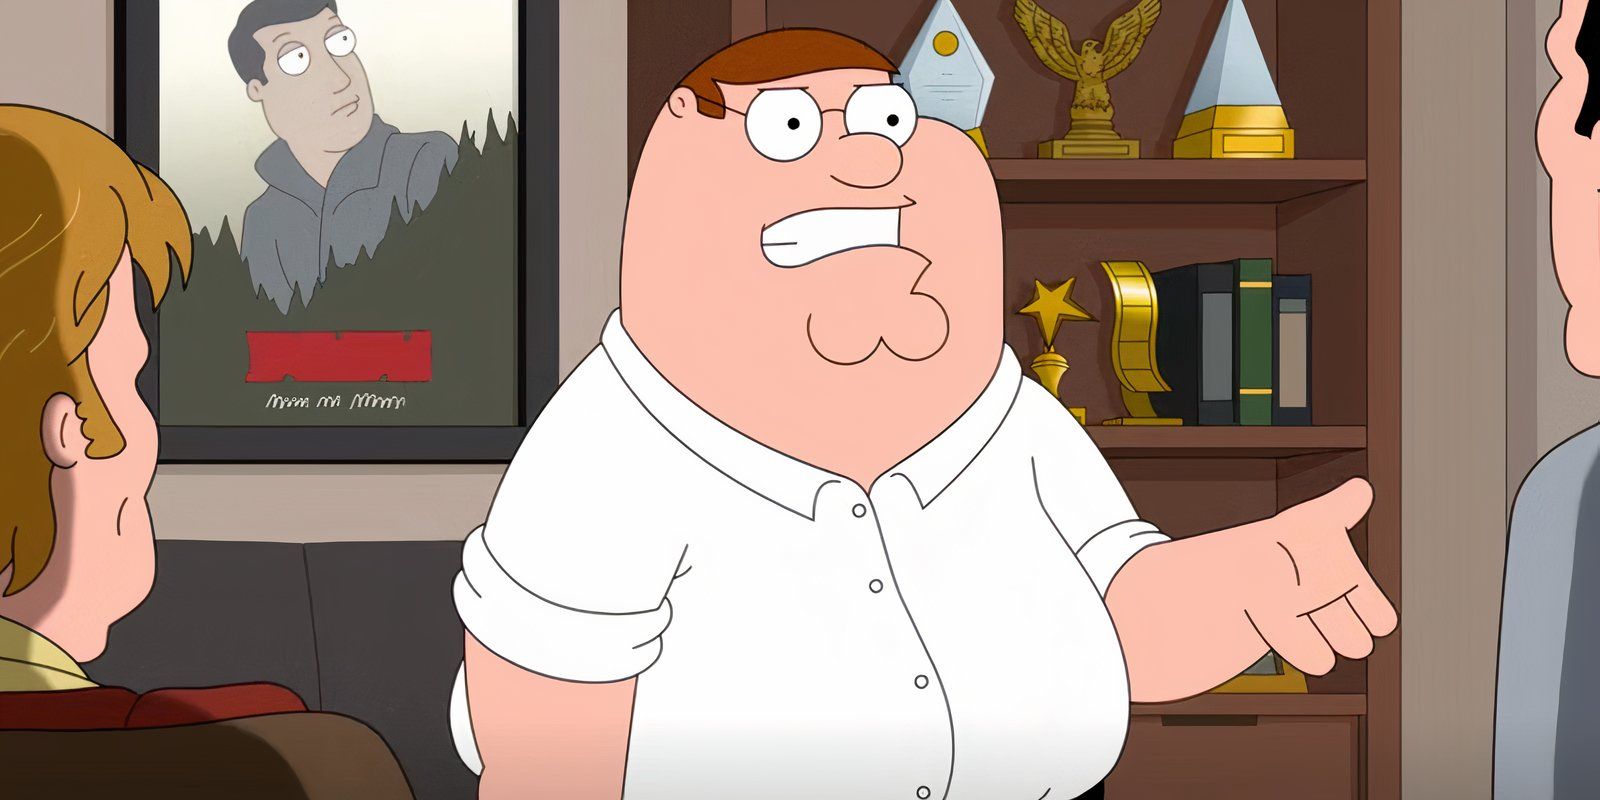 Peter Griffin looking angry while explaining something in Family Guy season 22 episode 14